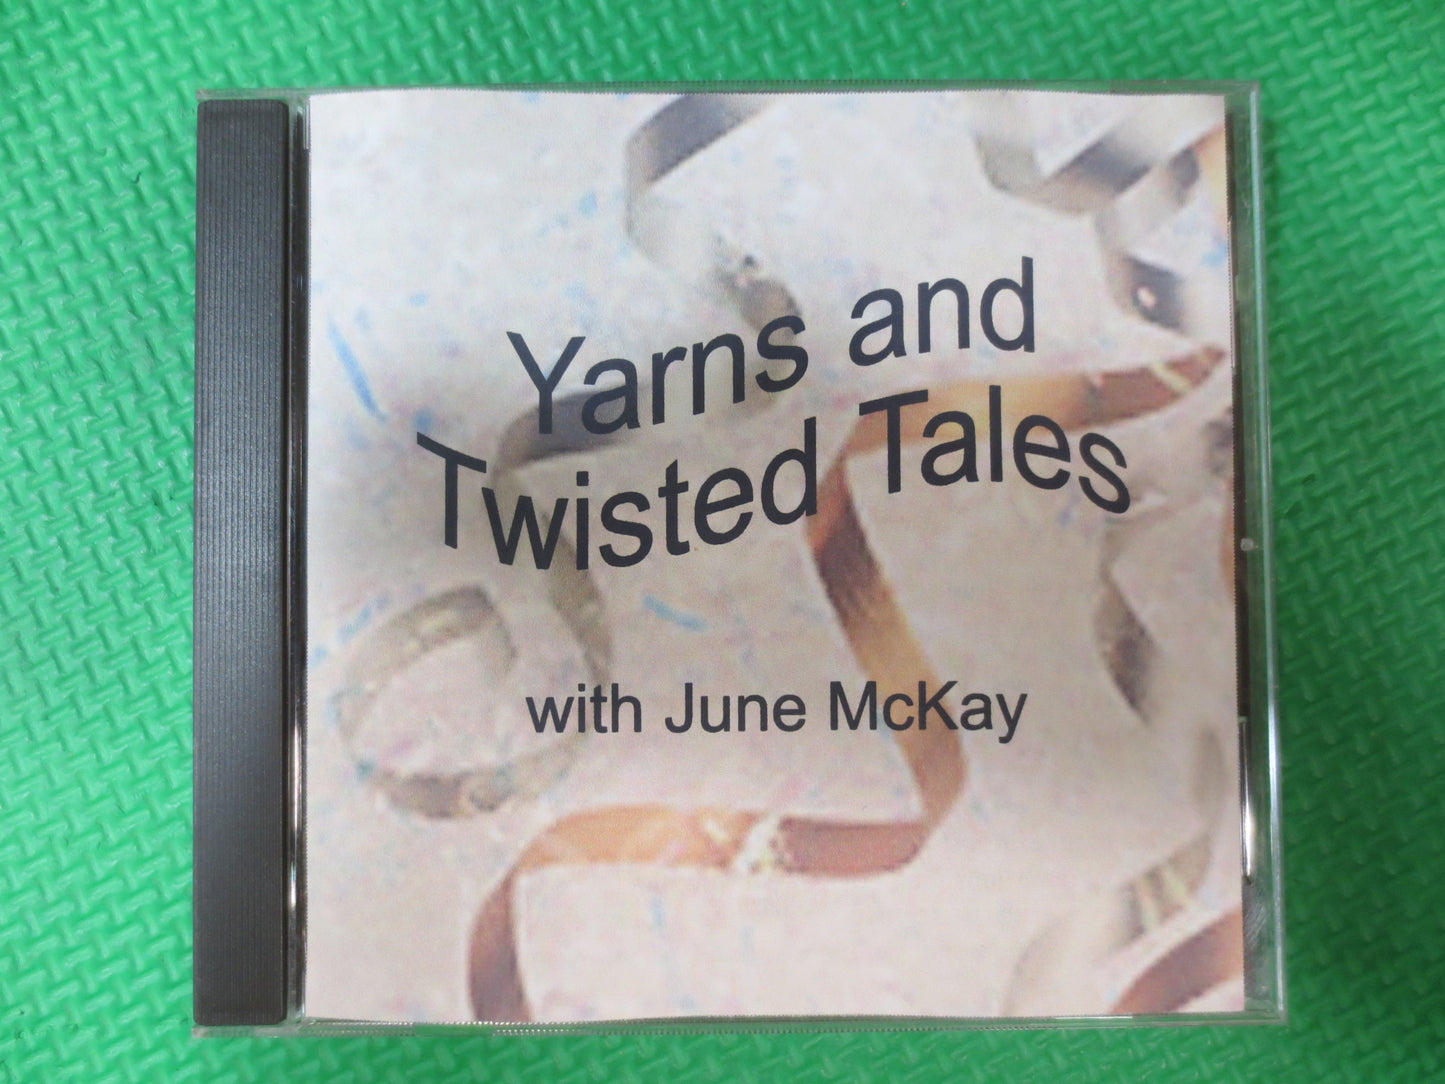 JUNE McKAY, Yarns and TWISTED Tales, June McKay Lp, June McKay Cd, Vintage Compact Disc, June McKay Album, Compact Disc